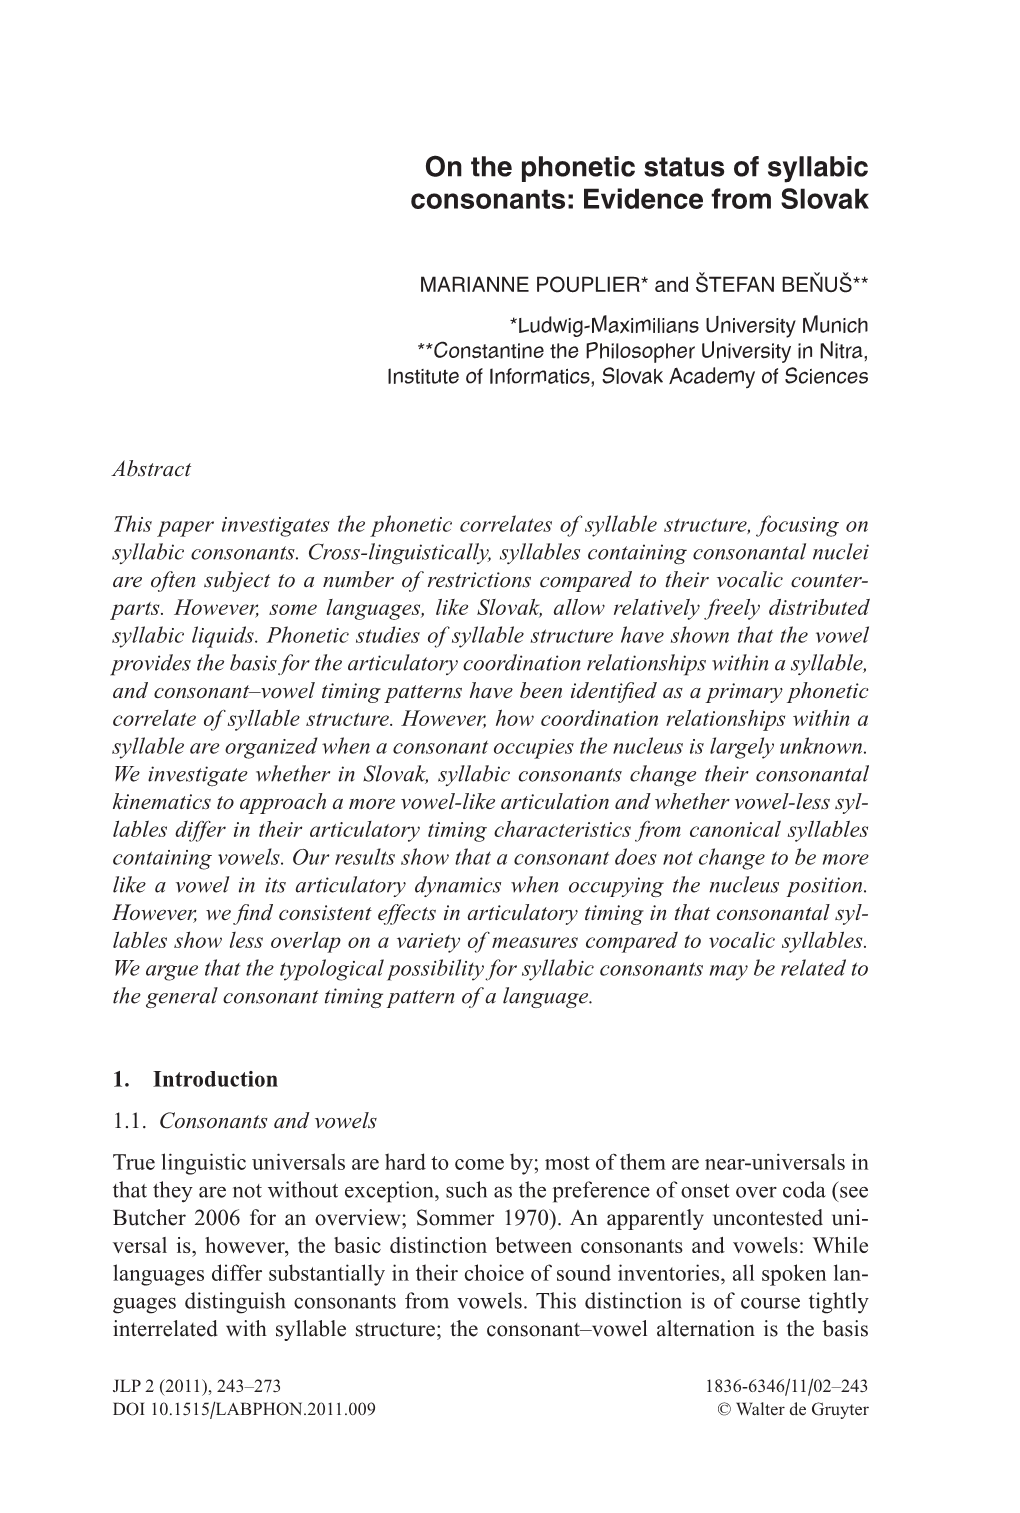 On the Phonetic Status of Syllabic Consonants: Evidence from Slovak